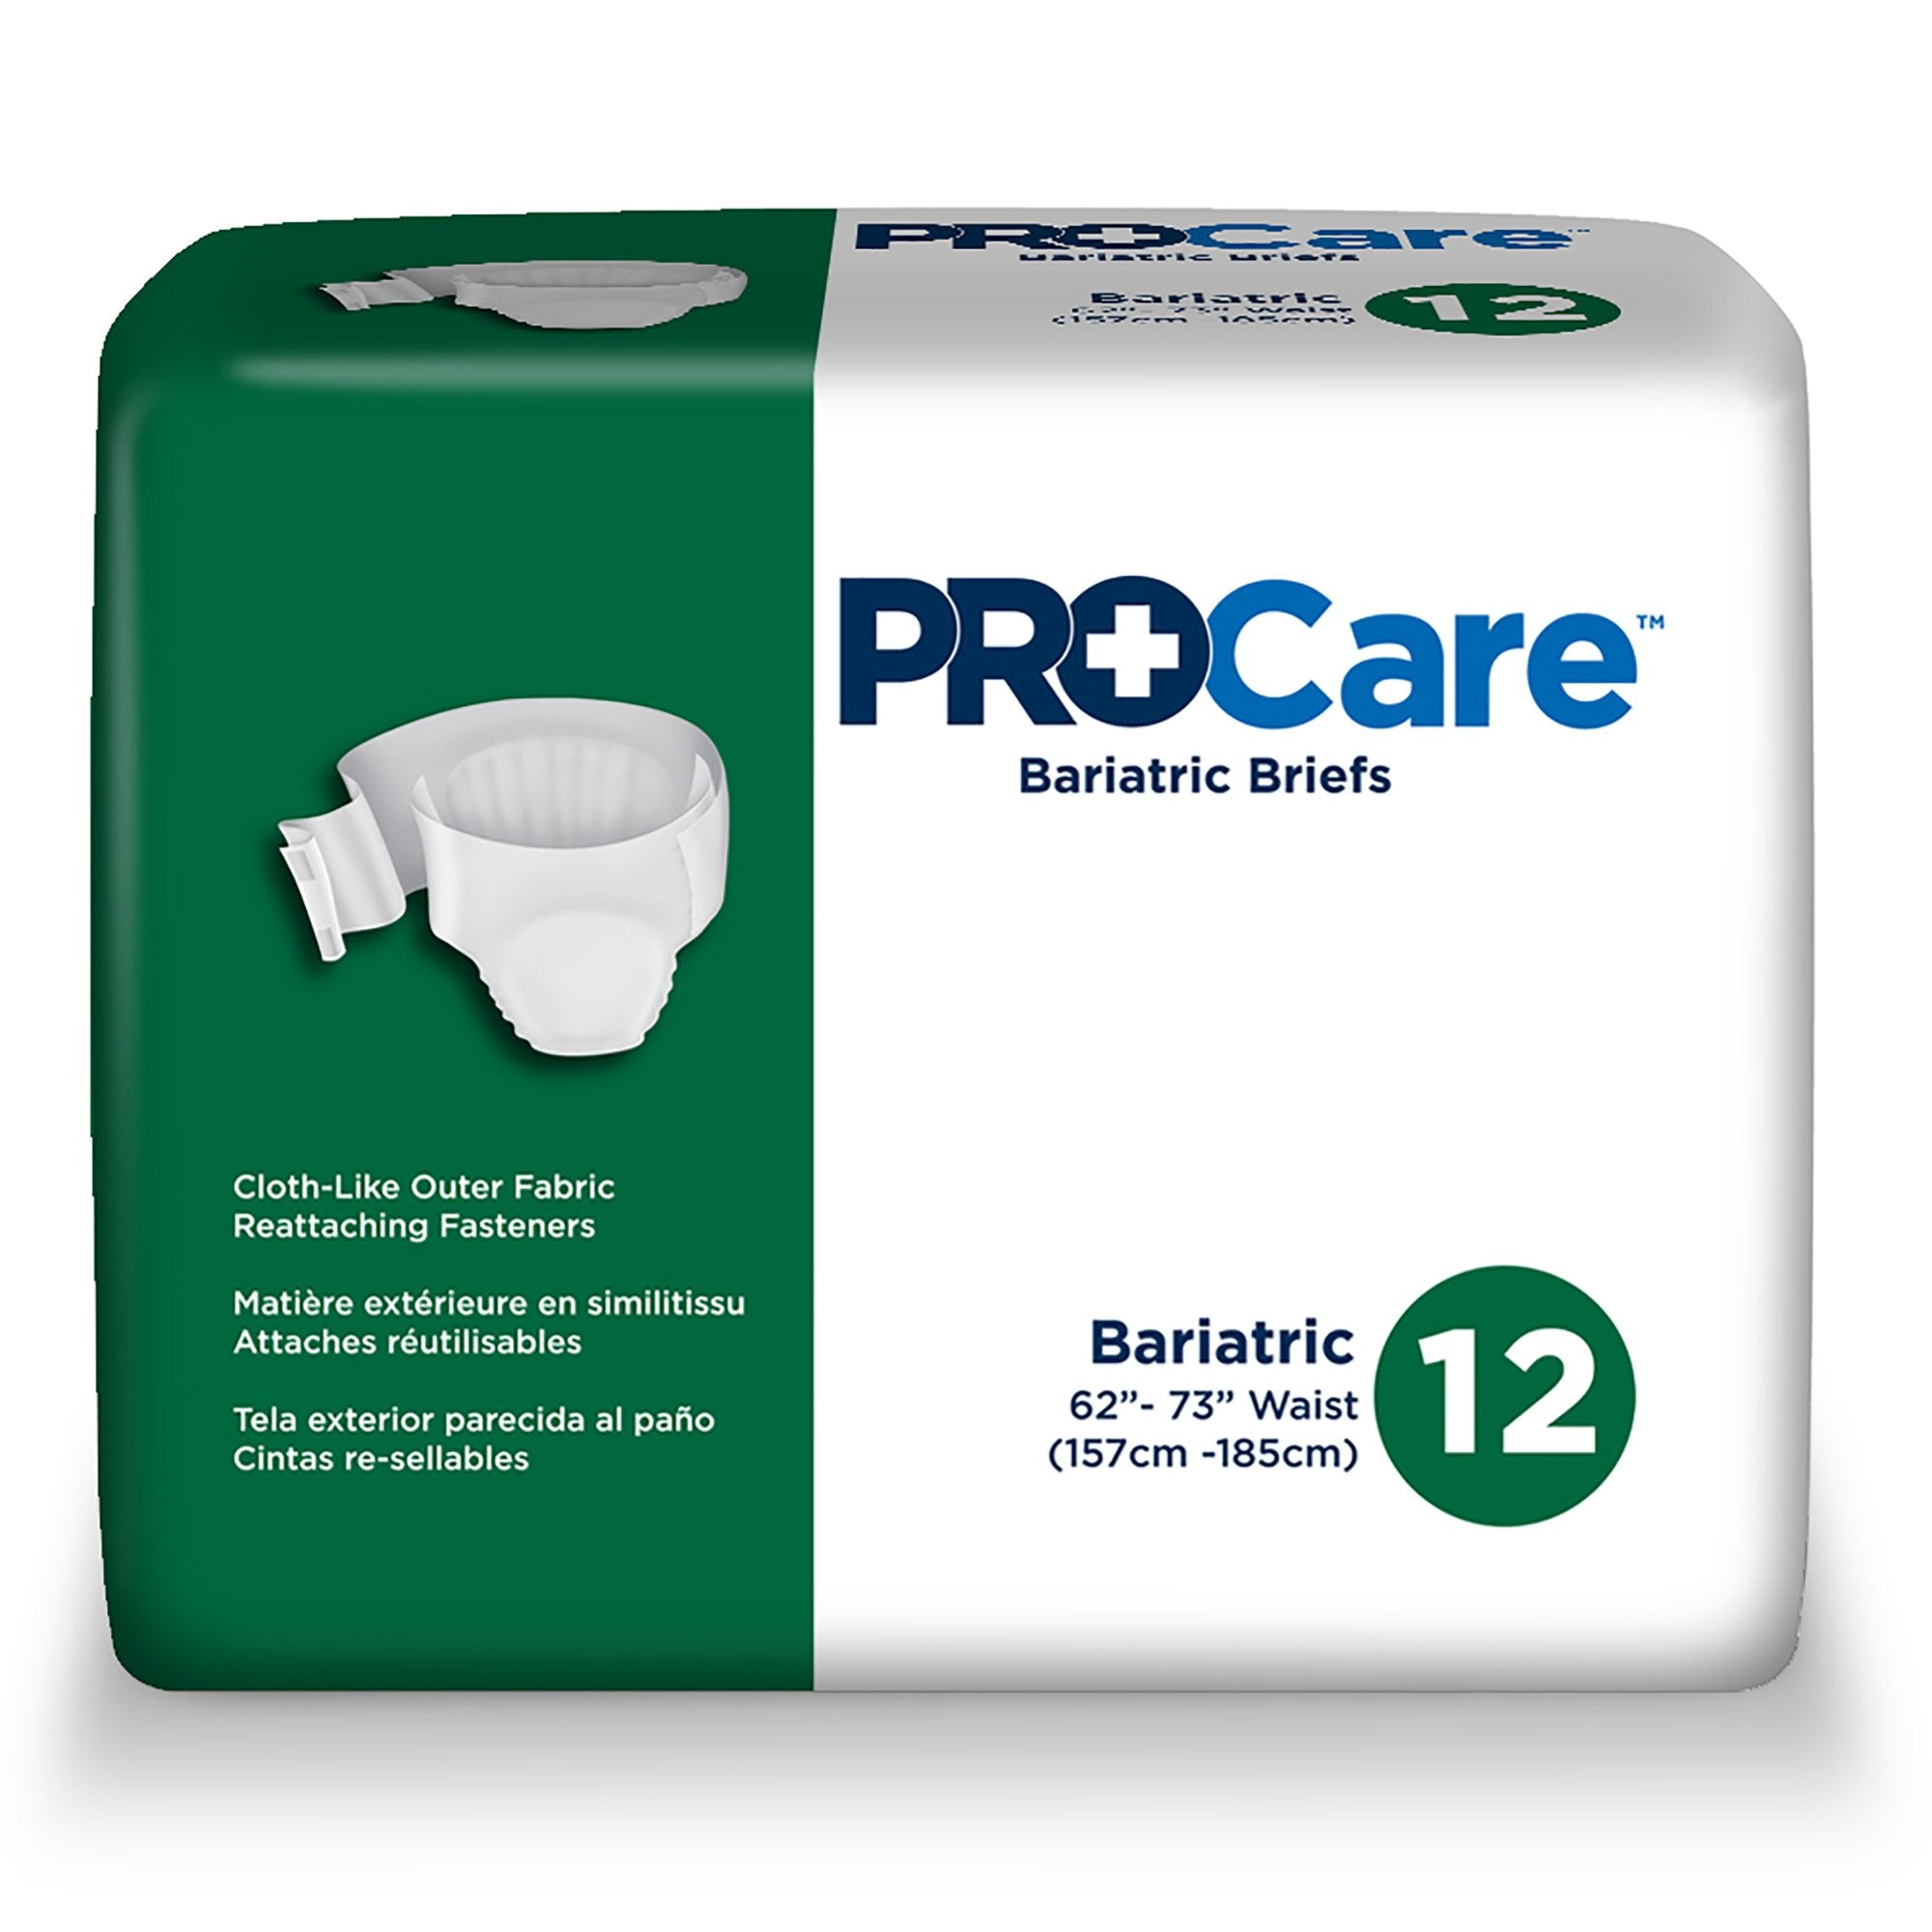 ProCare Unisex Adult Incontinence Brief, Heavy Absorbency, White, 2-XL